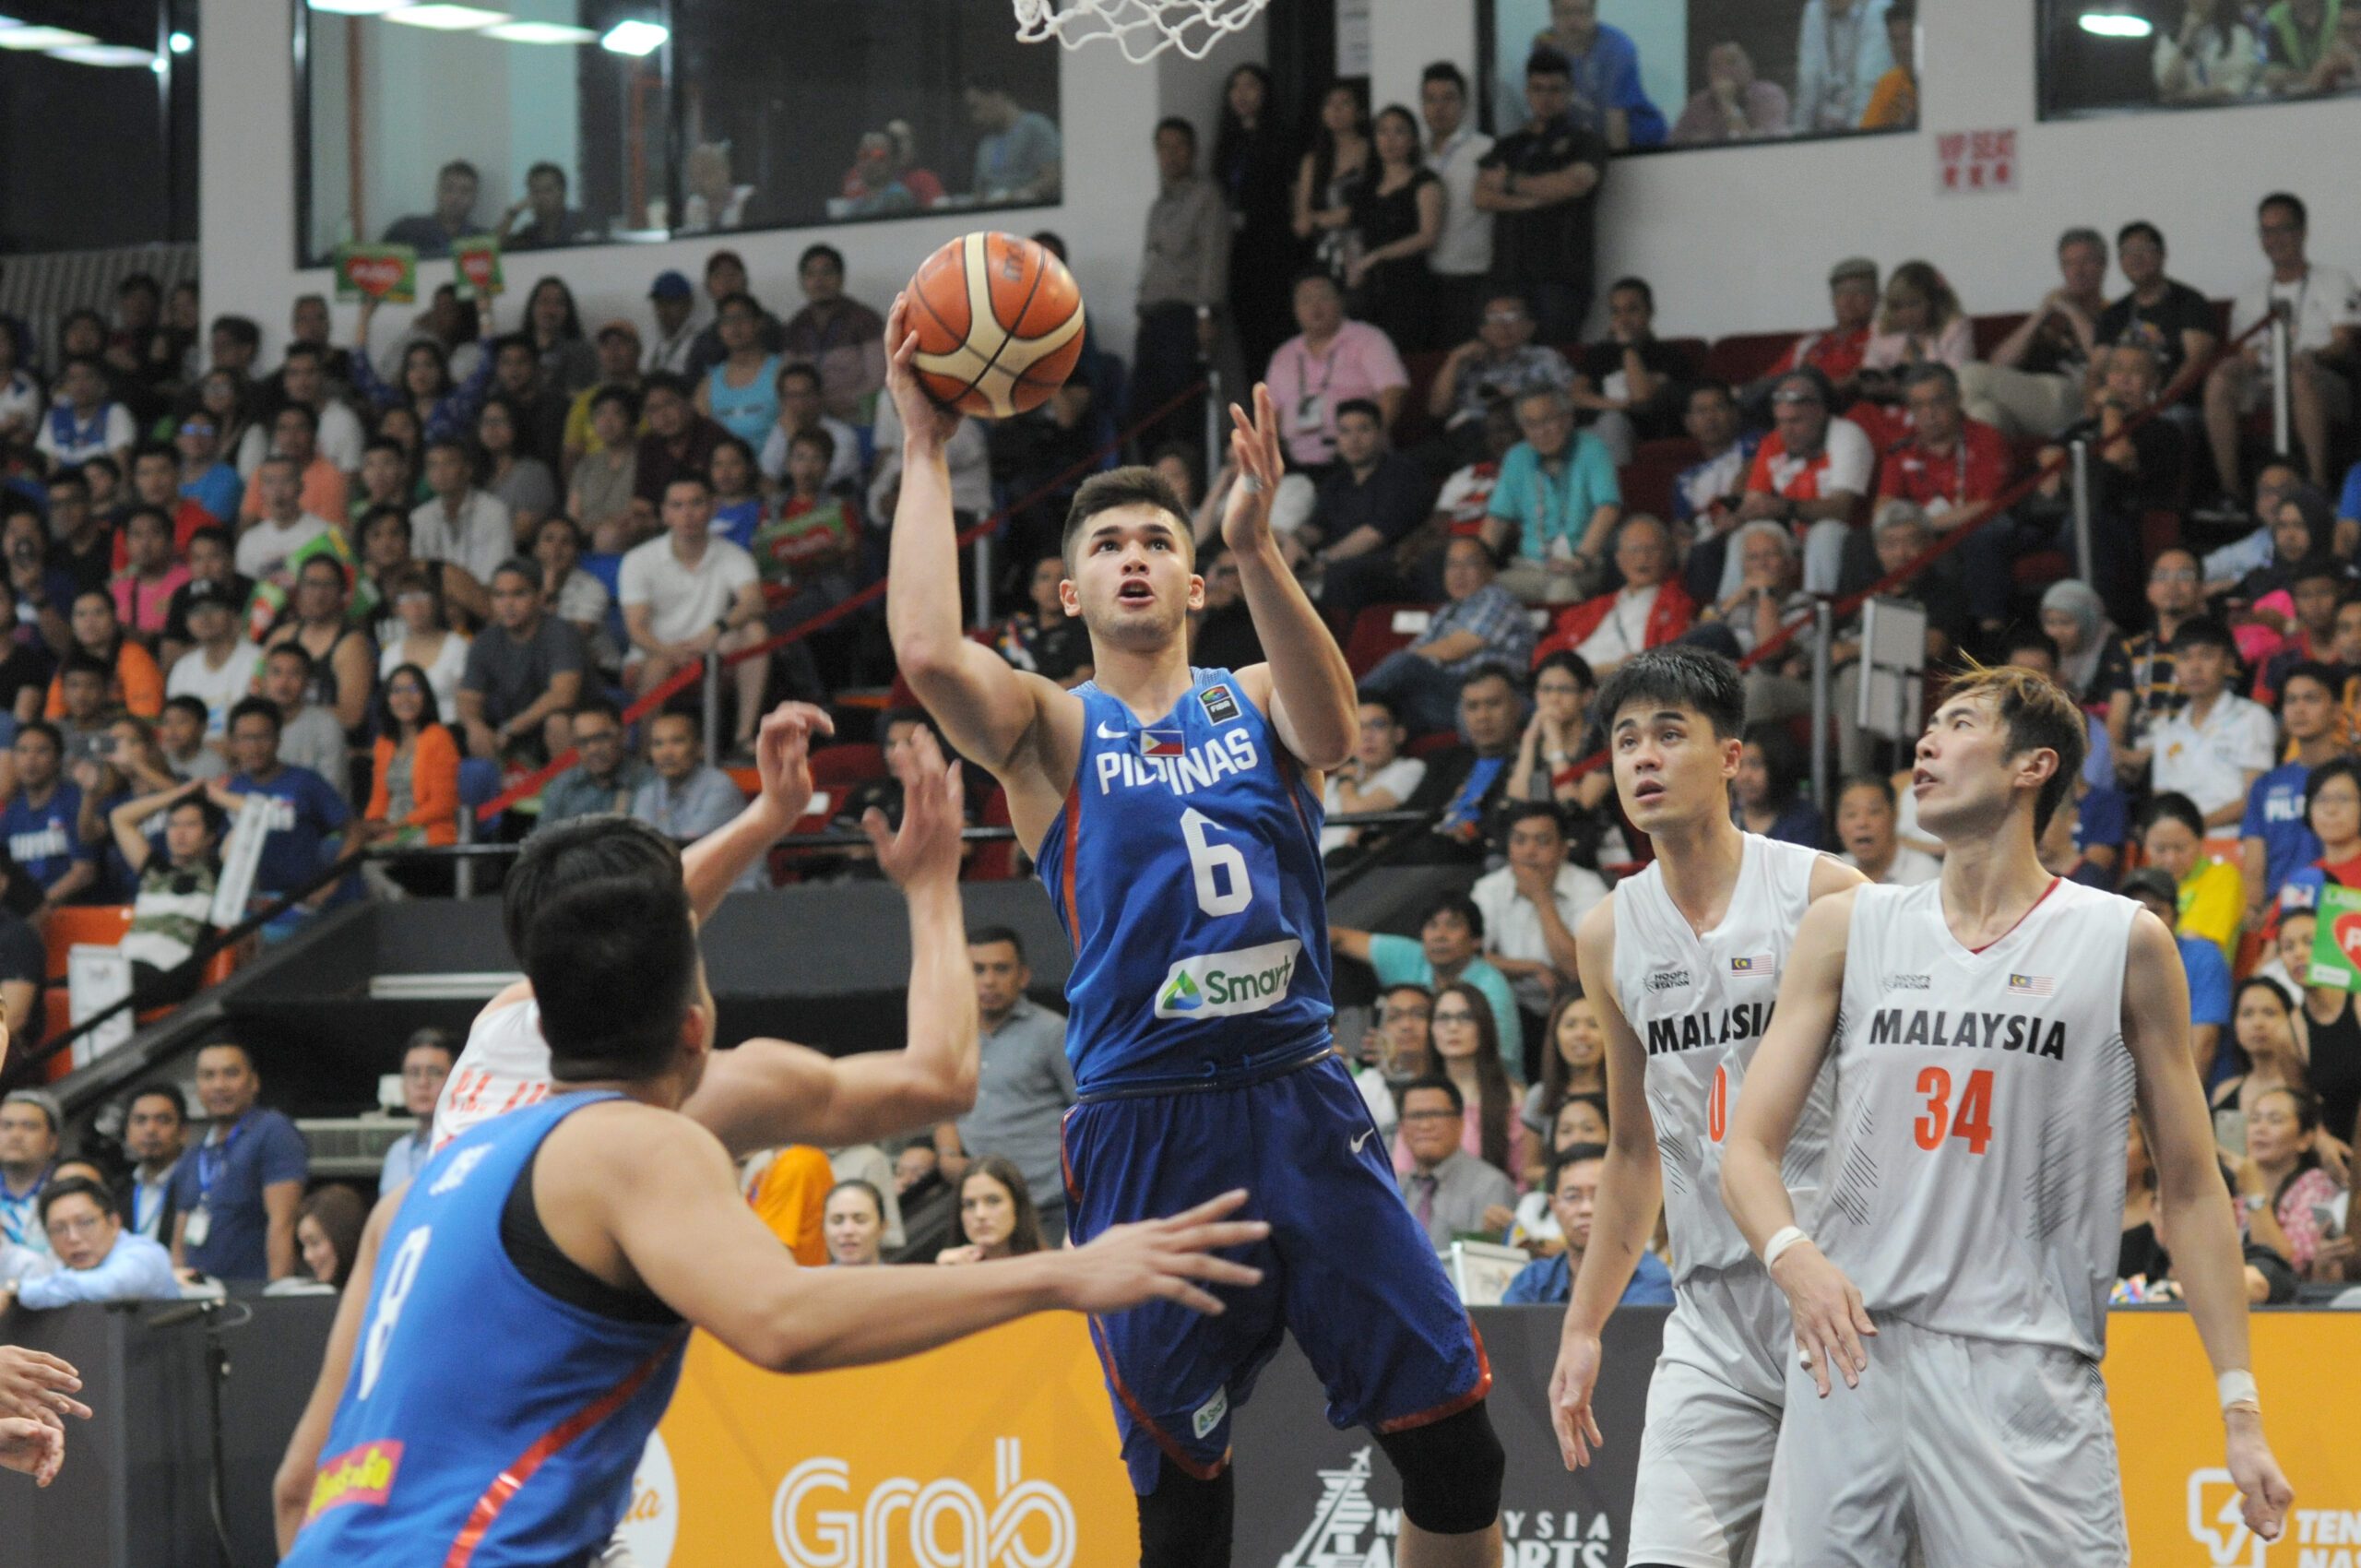 Gilas Pilipinas blows out Malaysia in tense match to sweep group phase